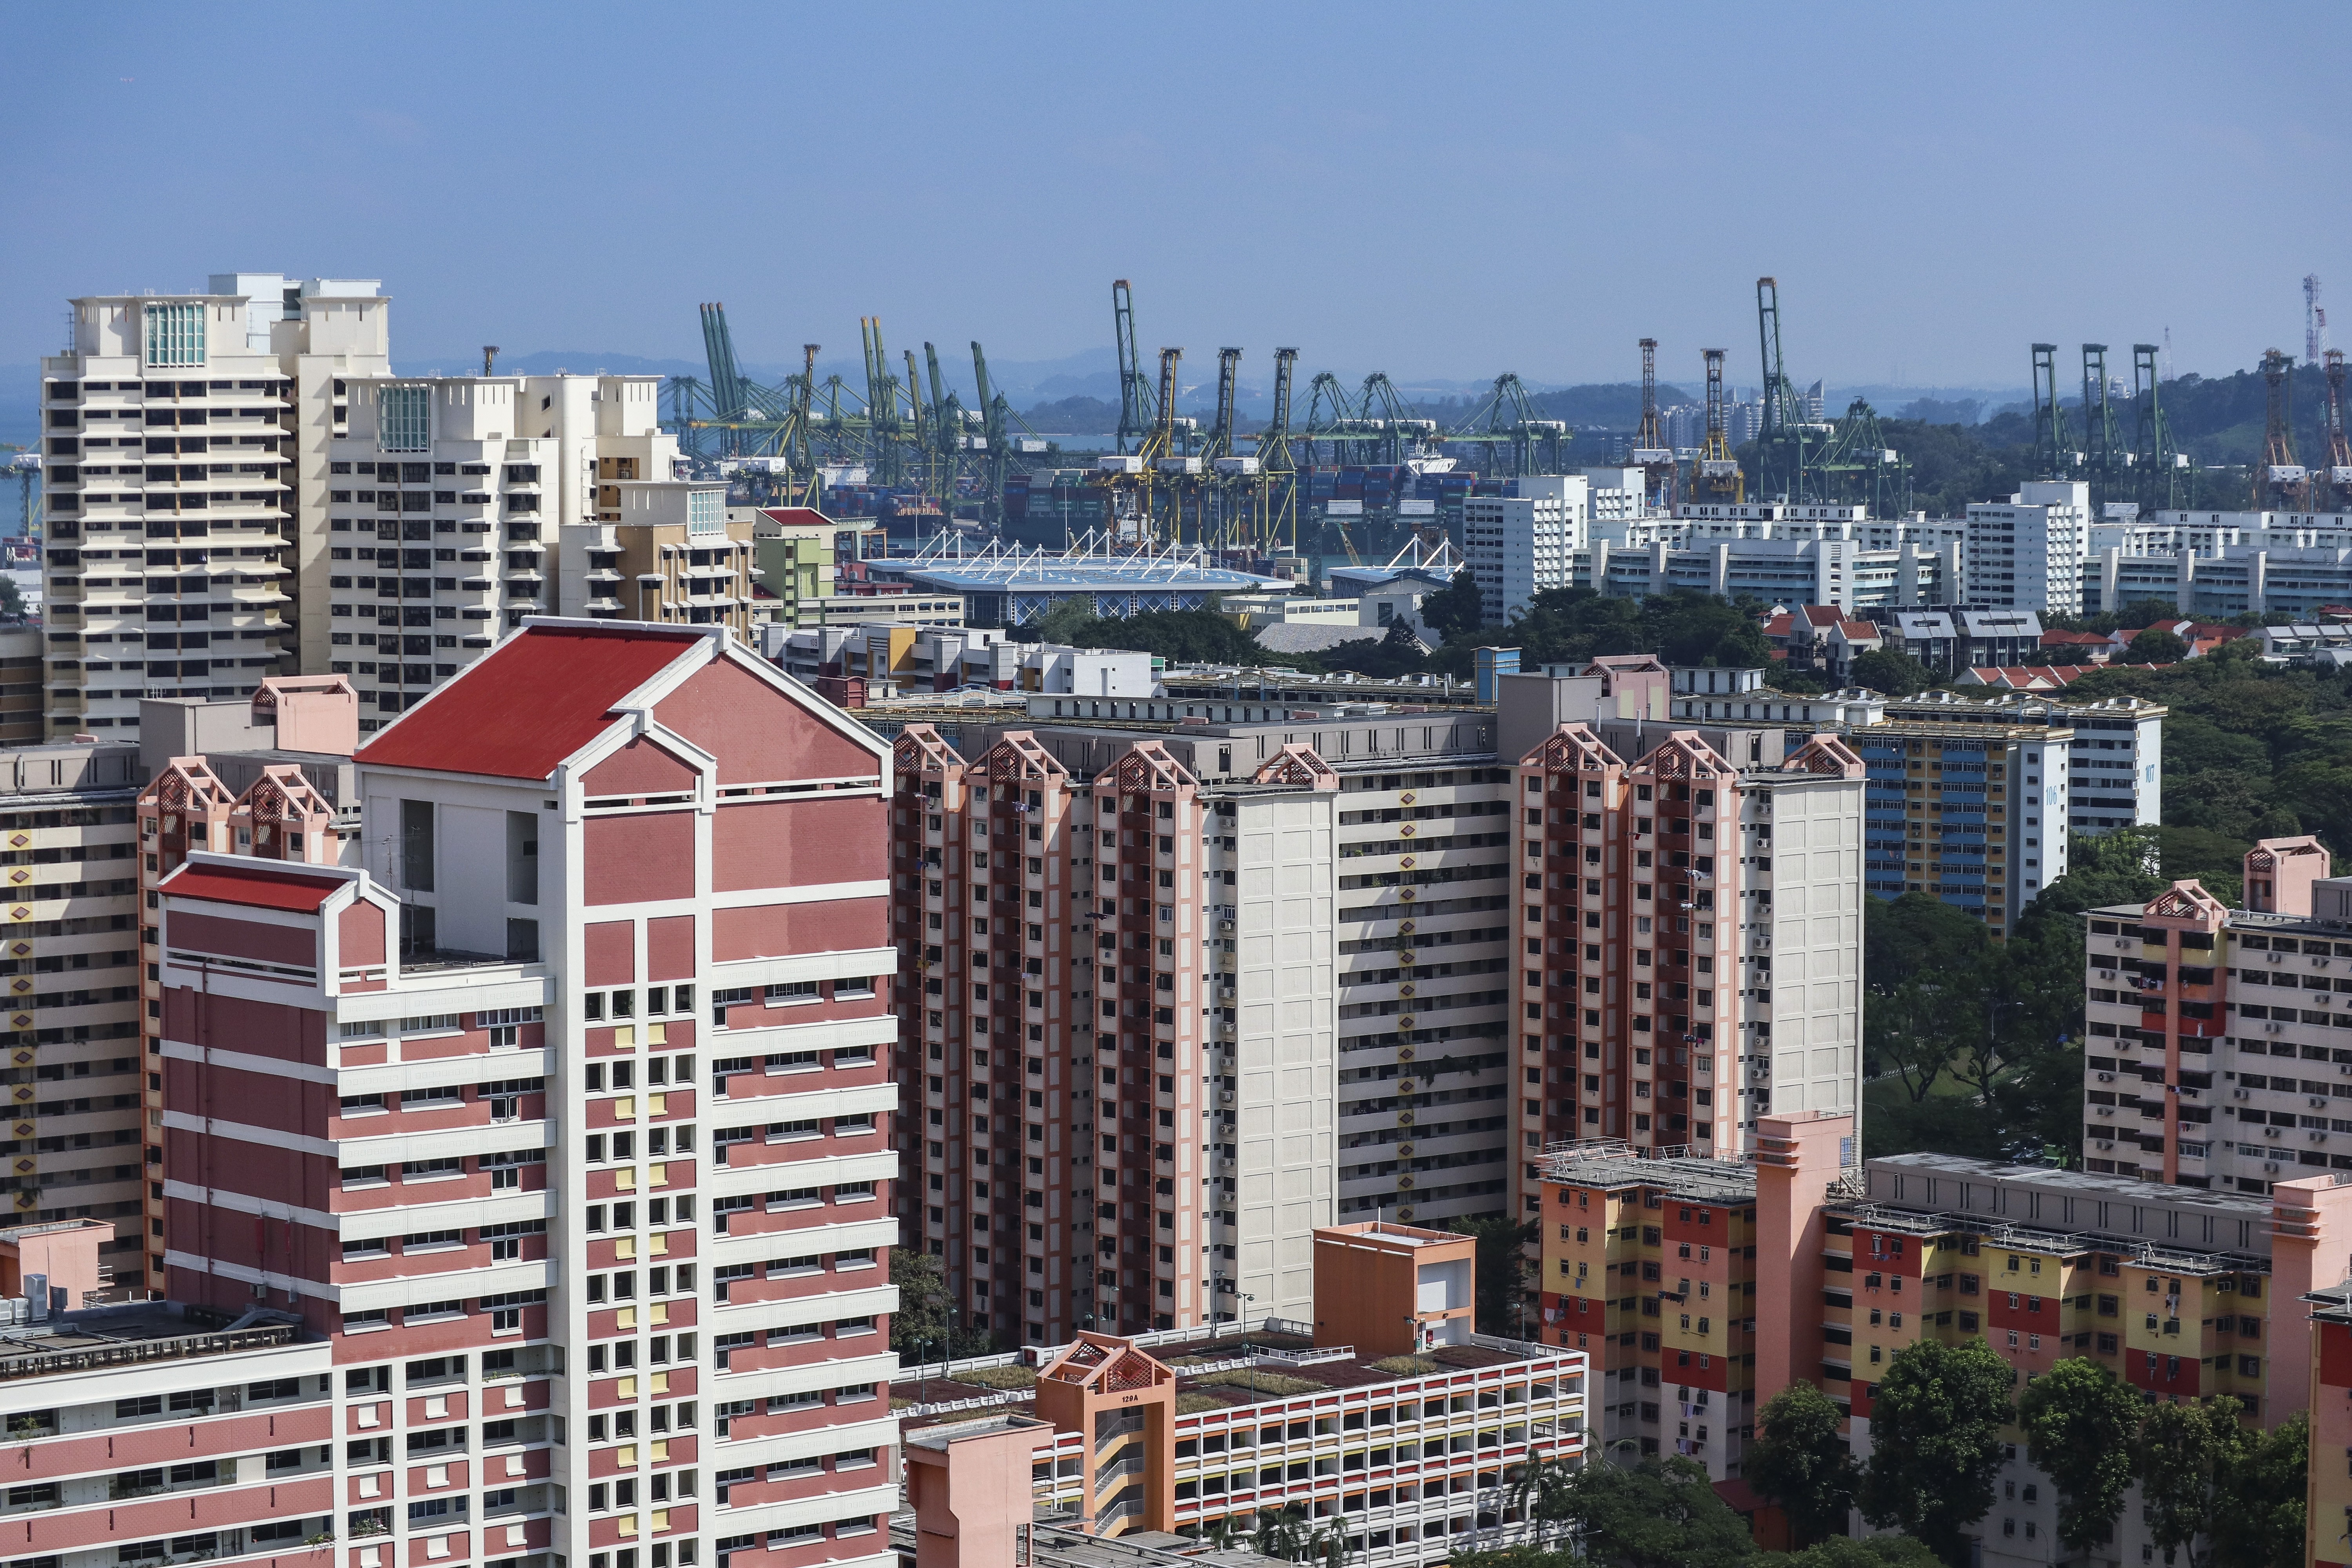 Public housing in Singapore by its Housing and Development Board. Photo: Roy Issa